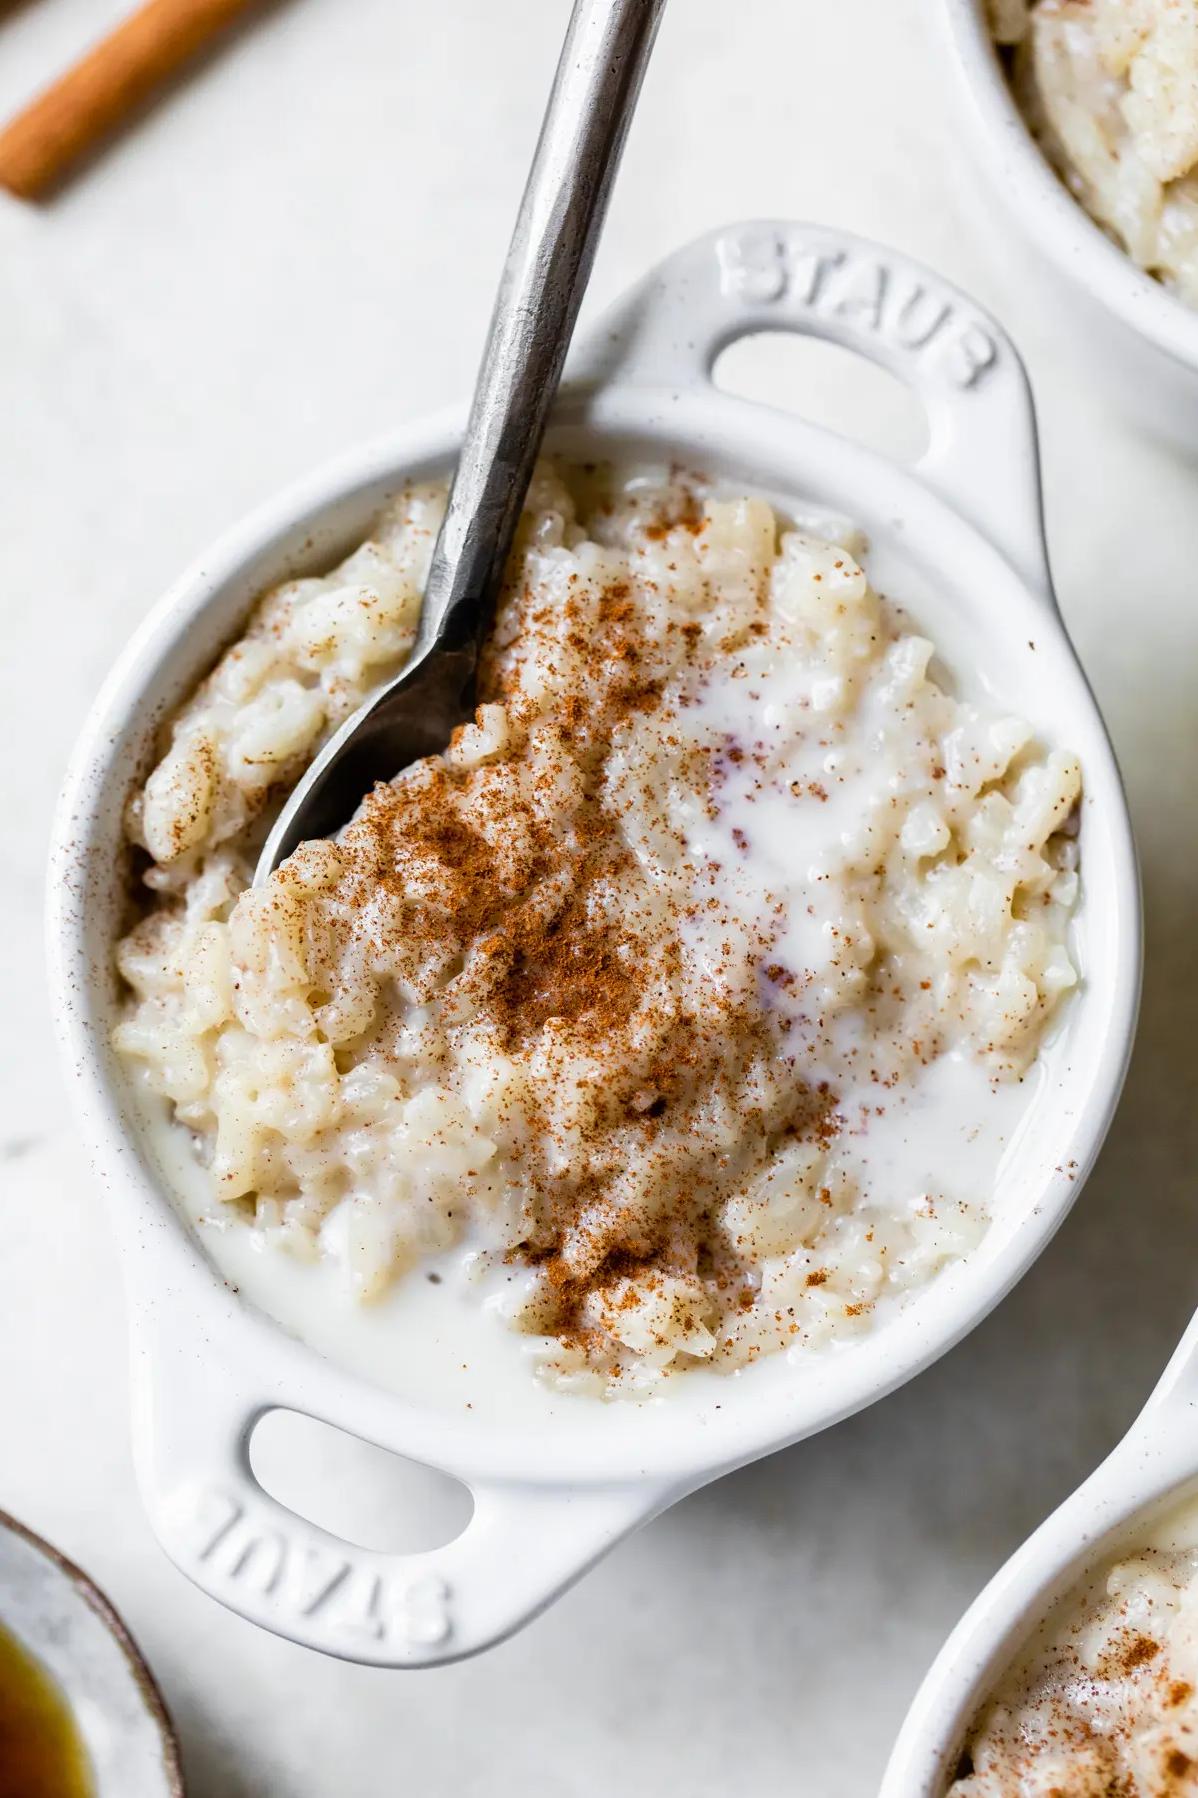  Topped with a sprinkle of cinnamon, this arroz con leche is a feast for the senses